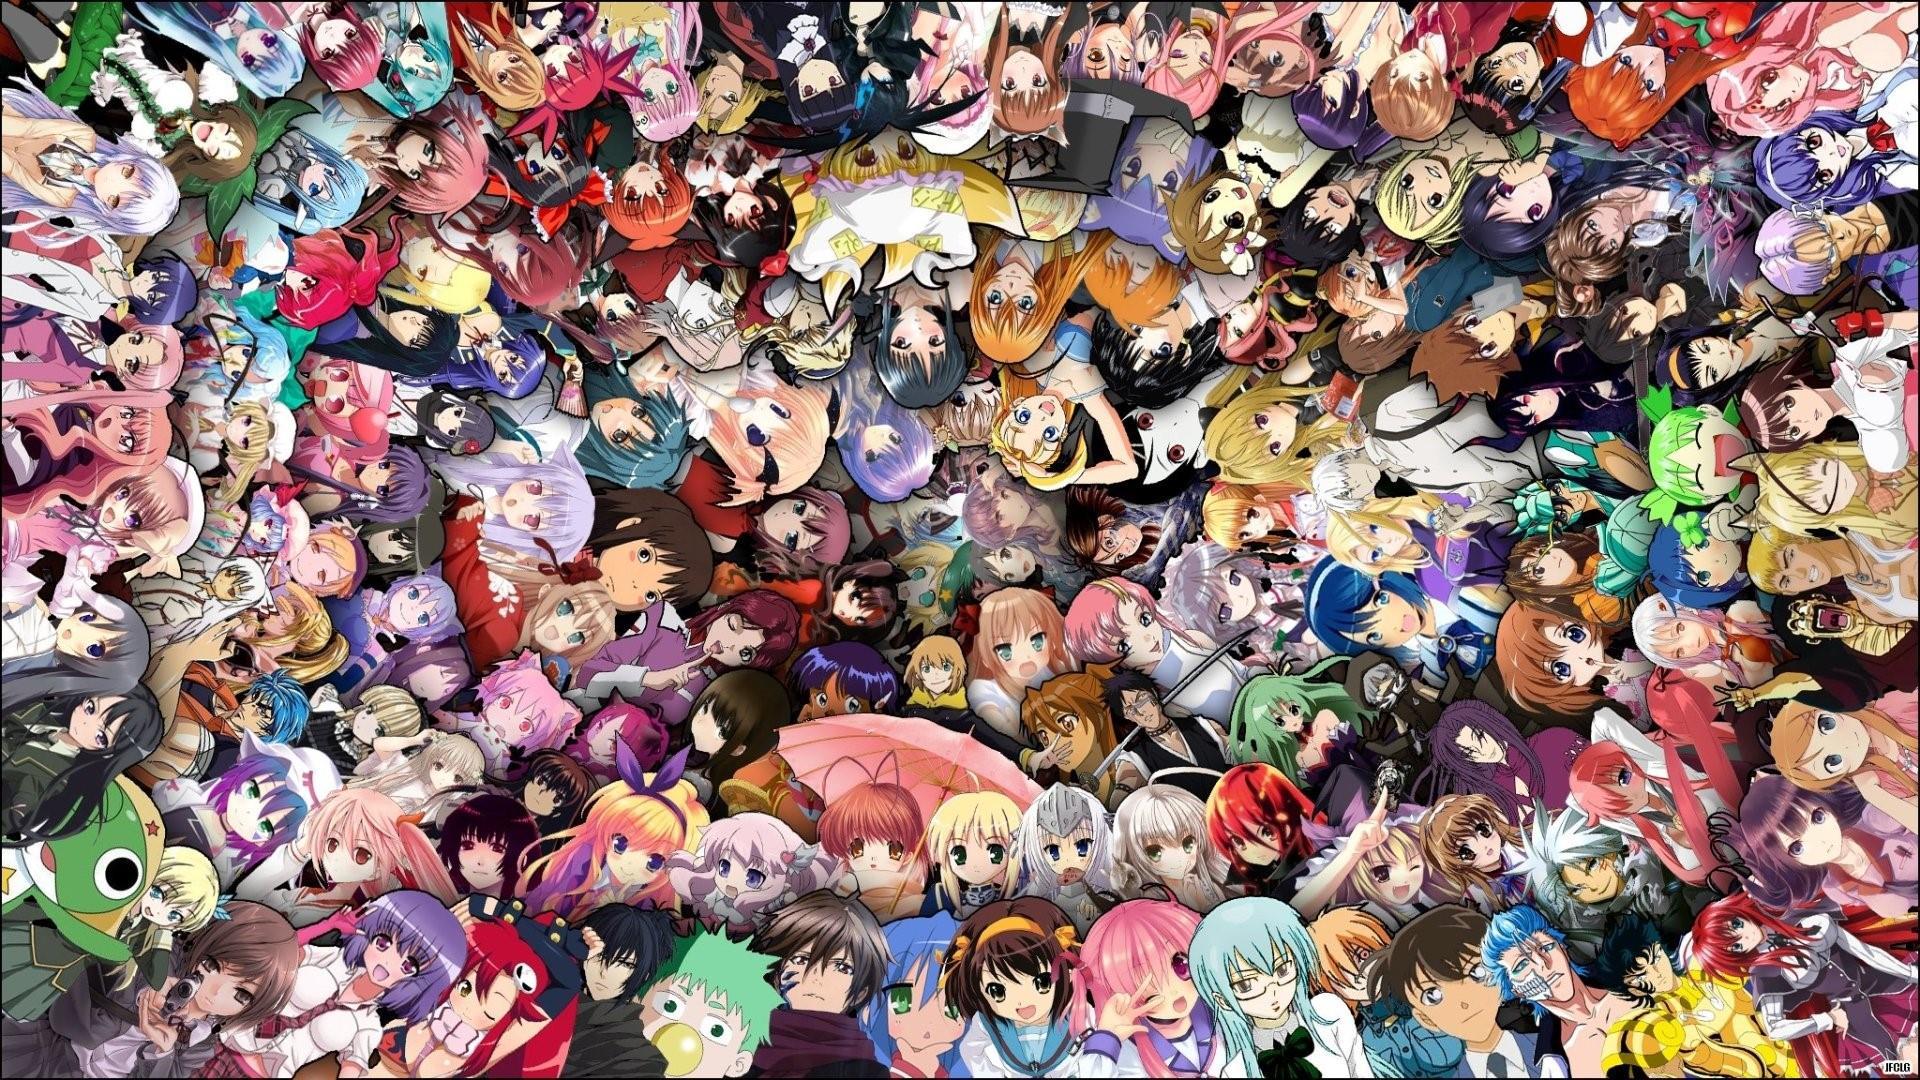 Anime Collage Wallpaper Free .wallpaperaccess.com